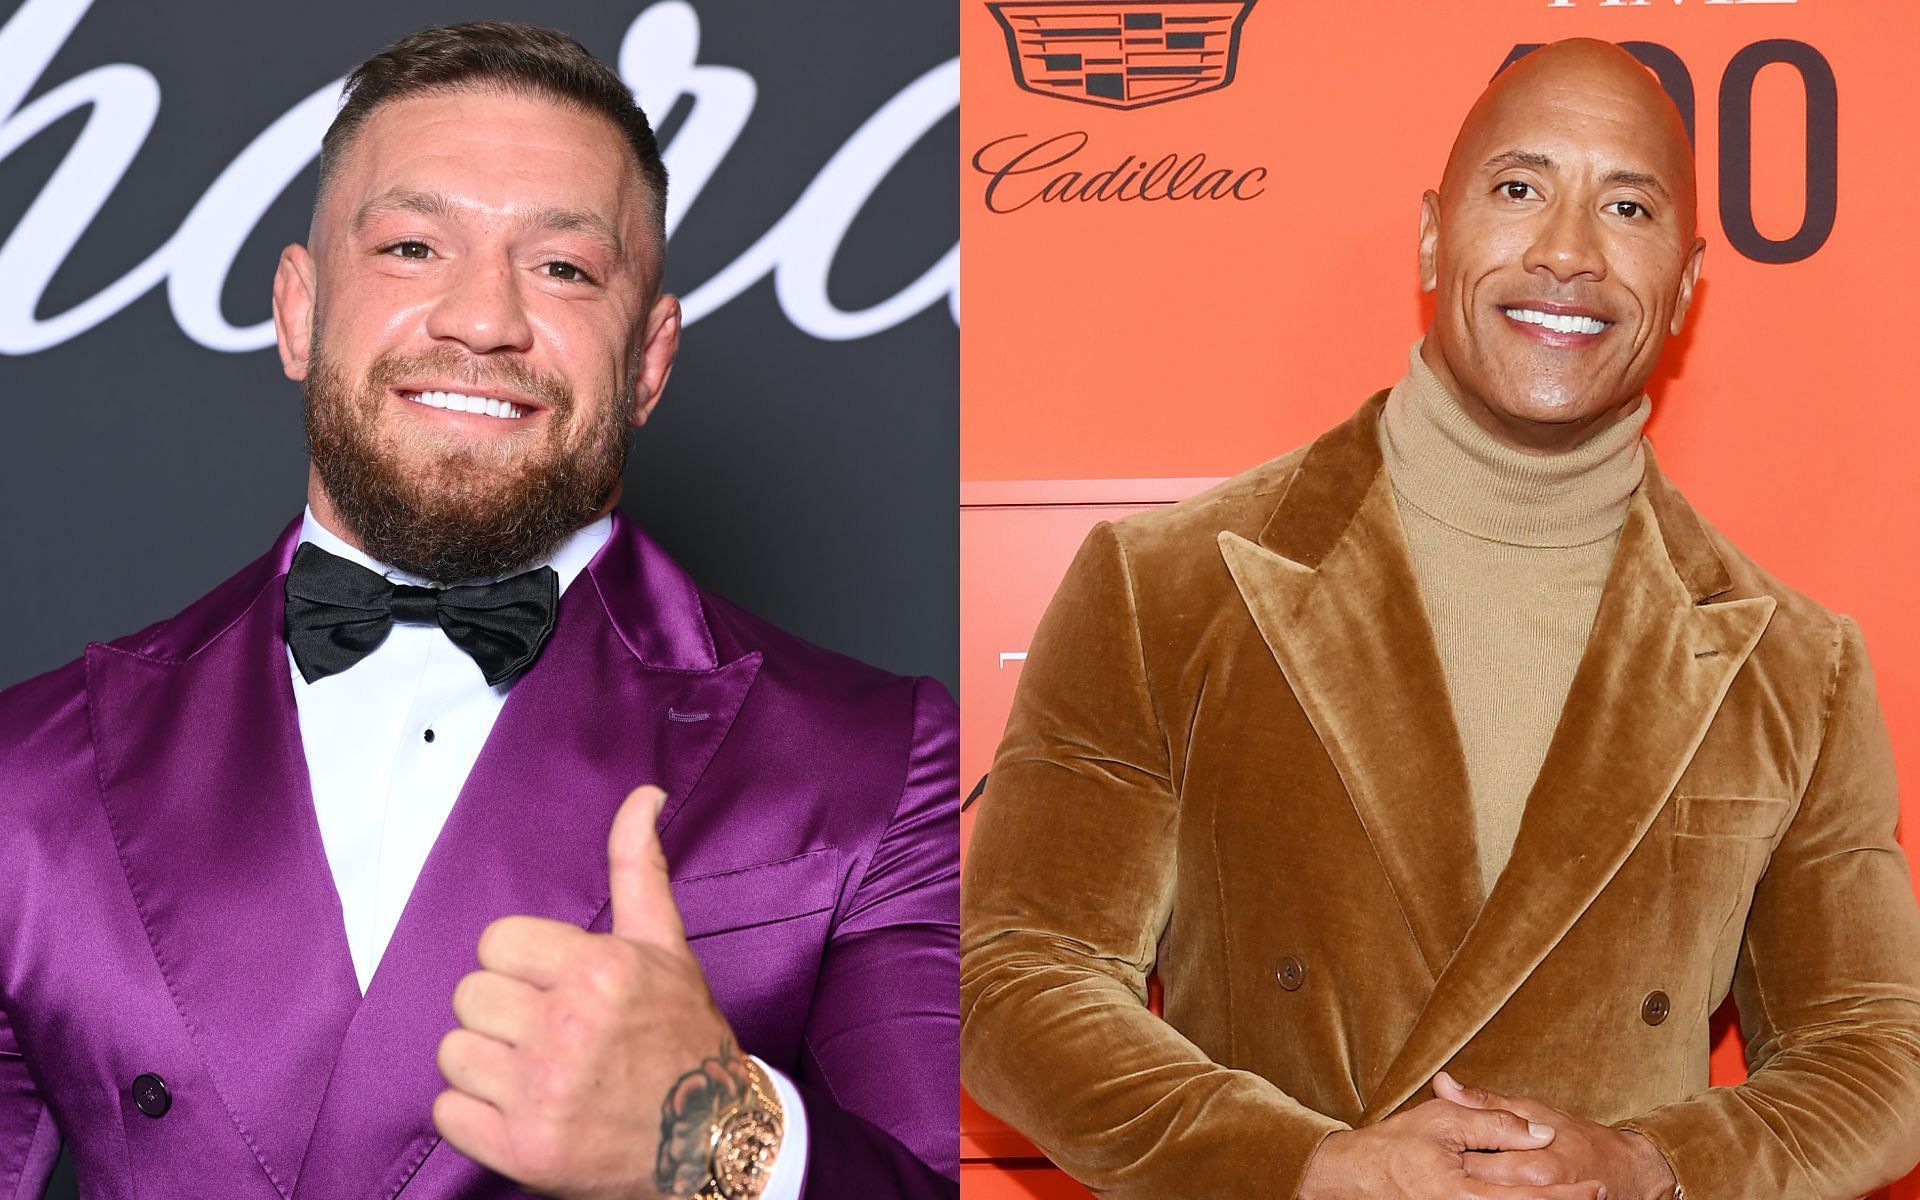 Conor McGregor (left) claims he